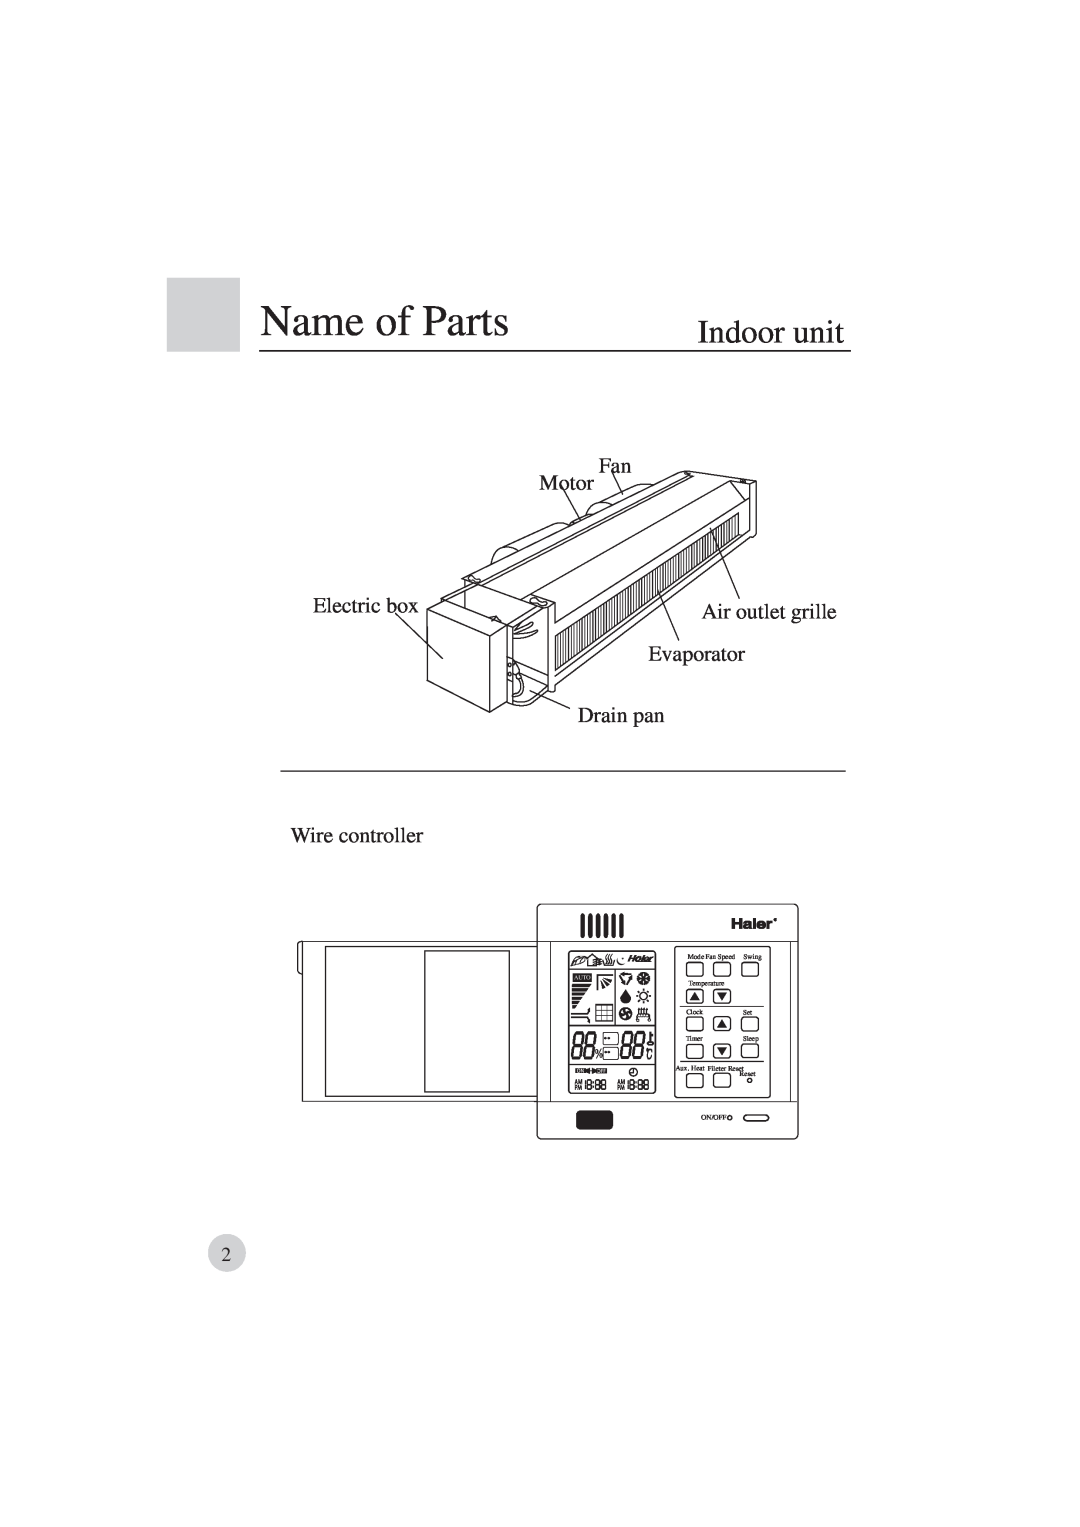 Haier AE122BCAAA (H2EM-18H03) Name of Parts, Indoor unit, Fan Motor, Electric box, Air outlet grille Evaporator, On/Off 